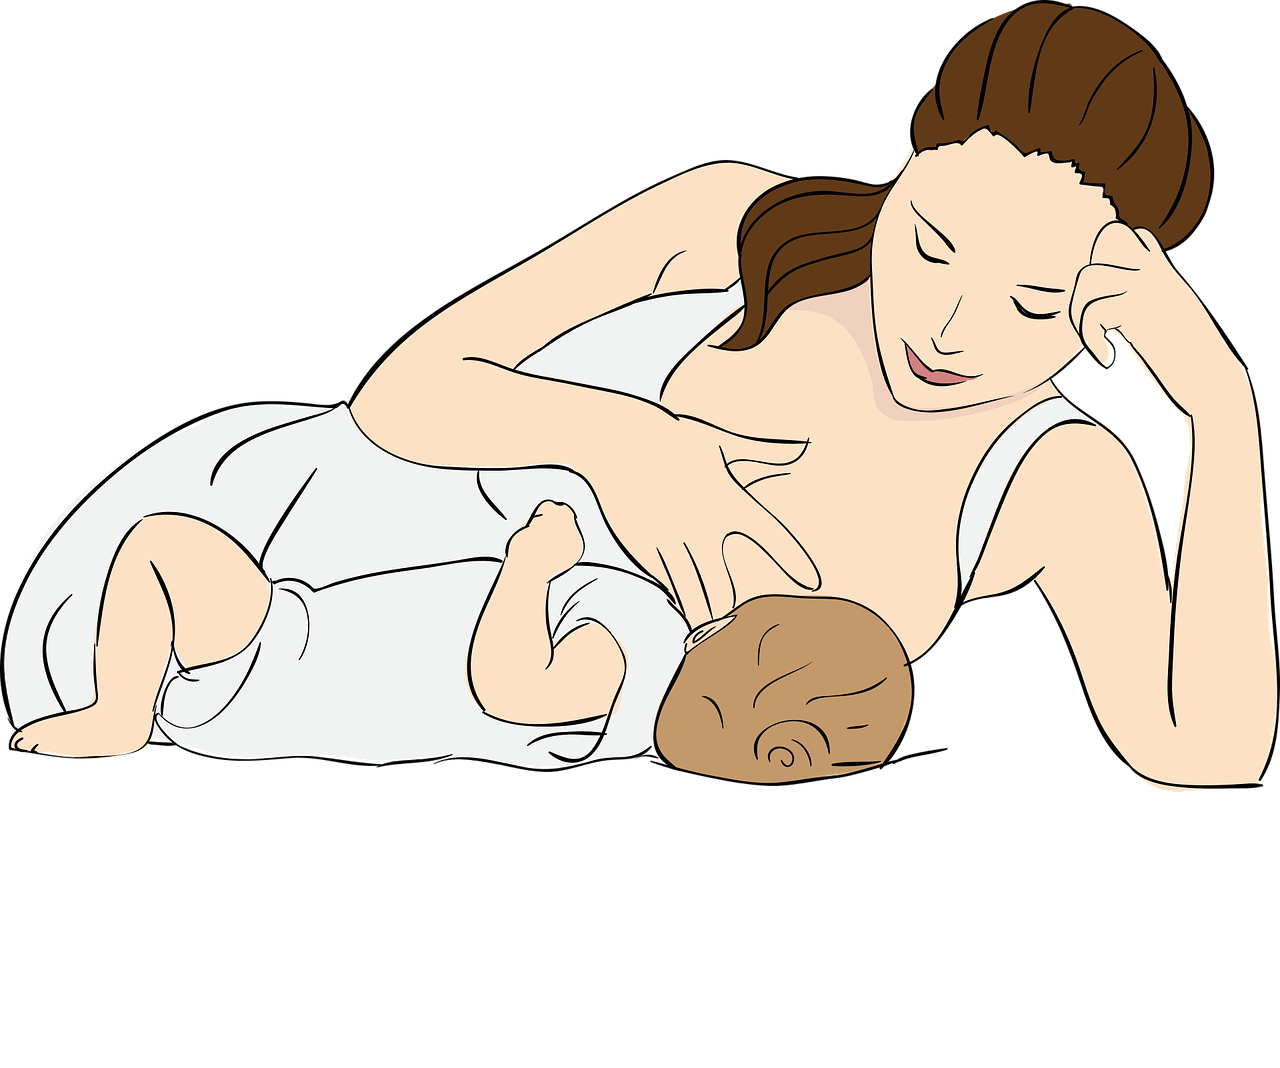 a woman that is laying down with a baby, an illustration of, by Nándor Katona, pixabay, broad shoulder, wikihow illustration, on a black background, milk